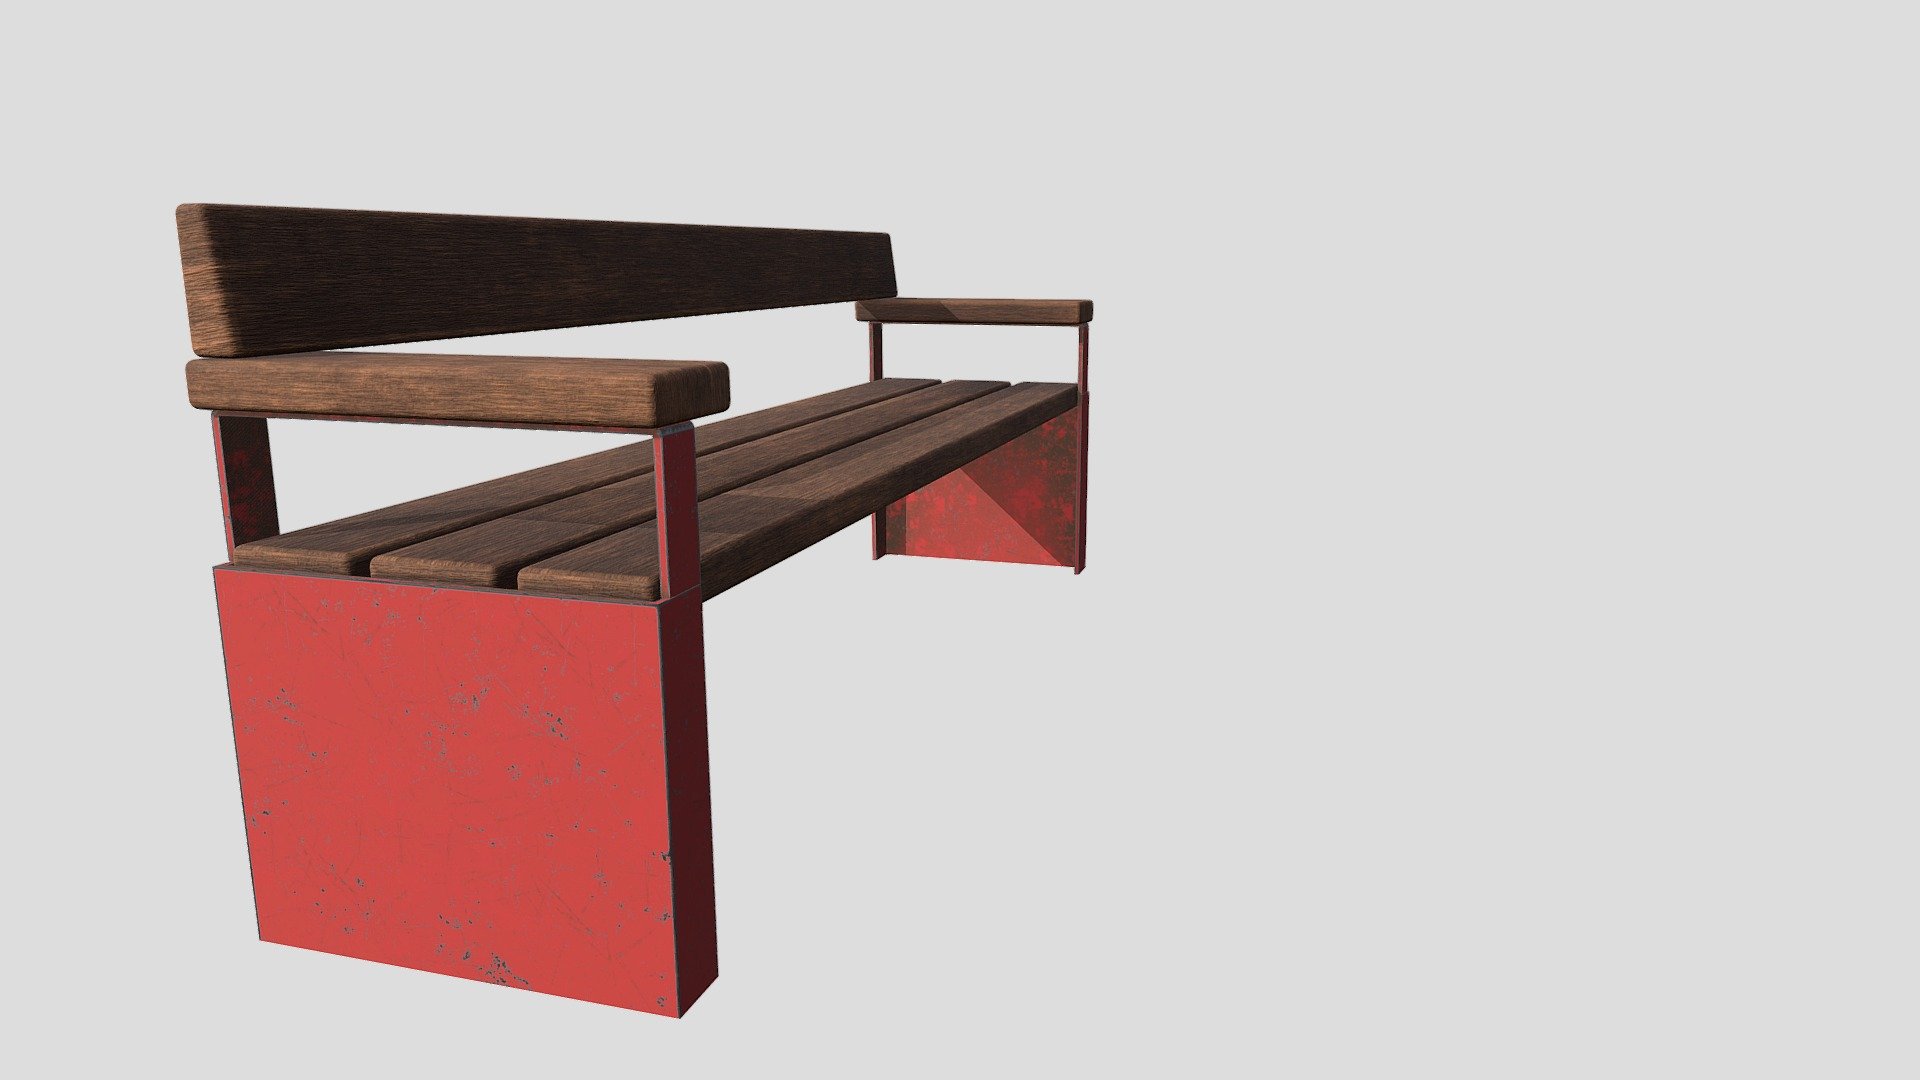 Scale model of a wooden bench on a metal support.
Made in Blender 2.93 and textured with Substance Painter 3d model